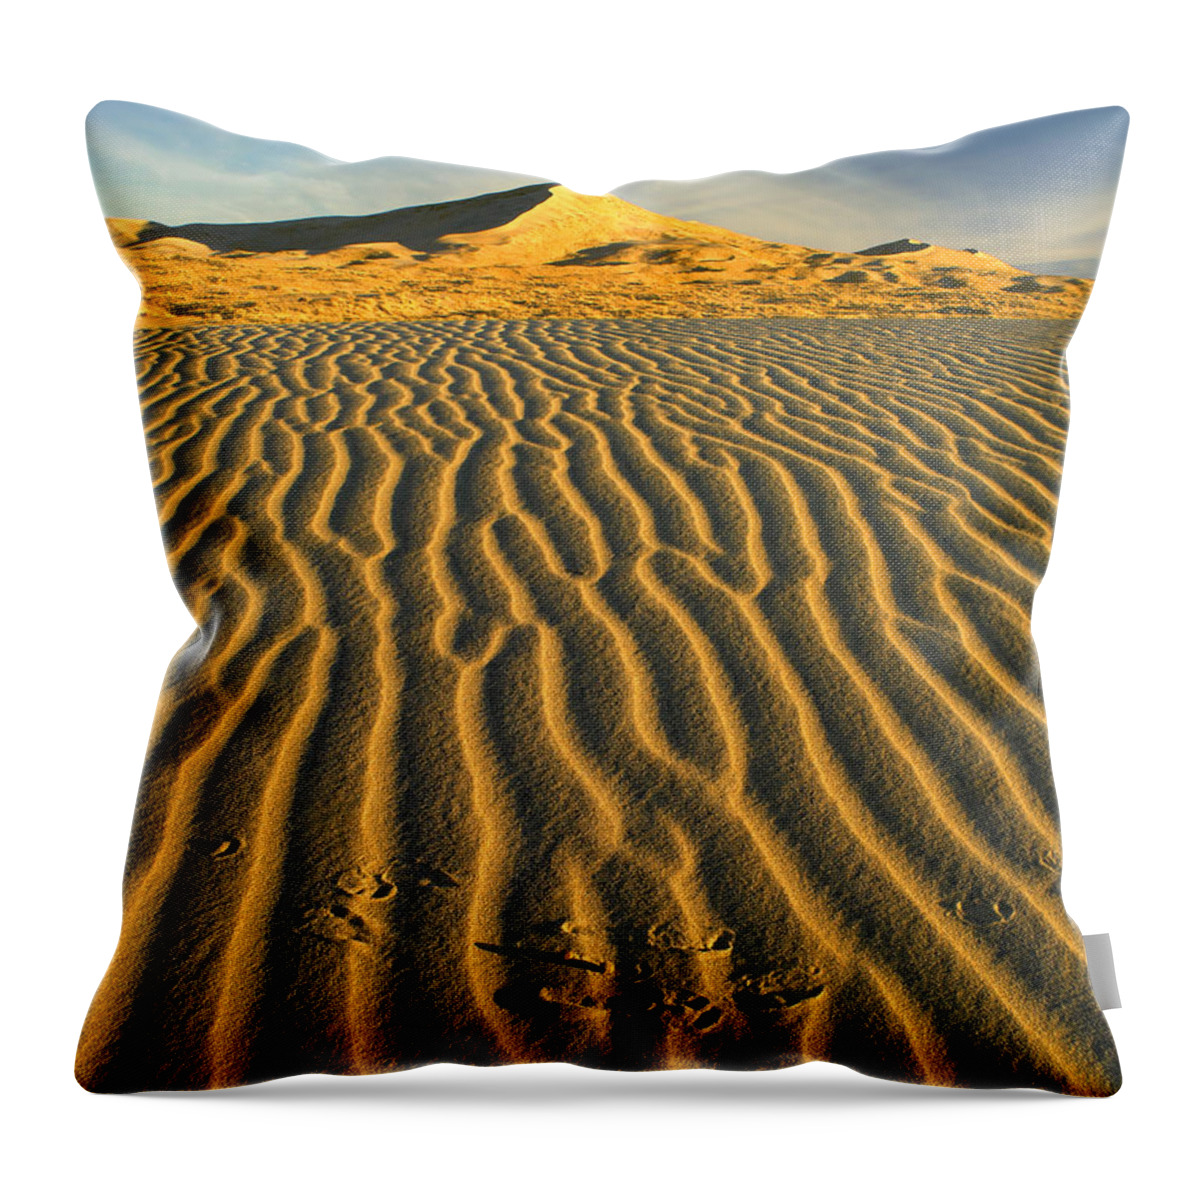 00175530 Throw Pillow featuring the photograph Wind Ripples In Kelso Dunes Mojave by Tim Fitzharris